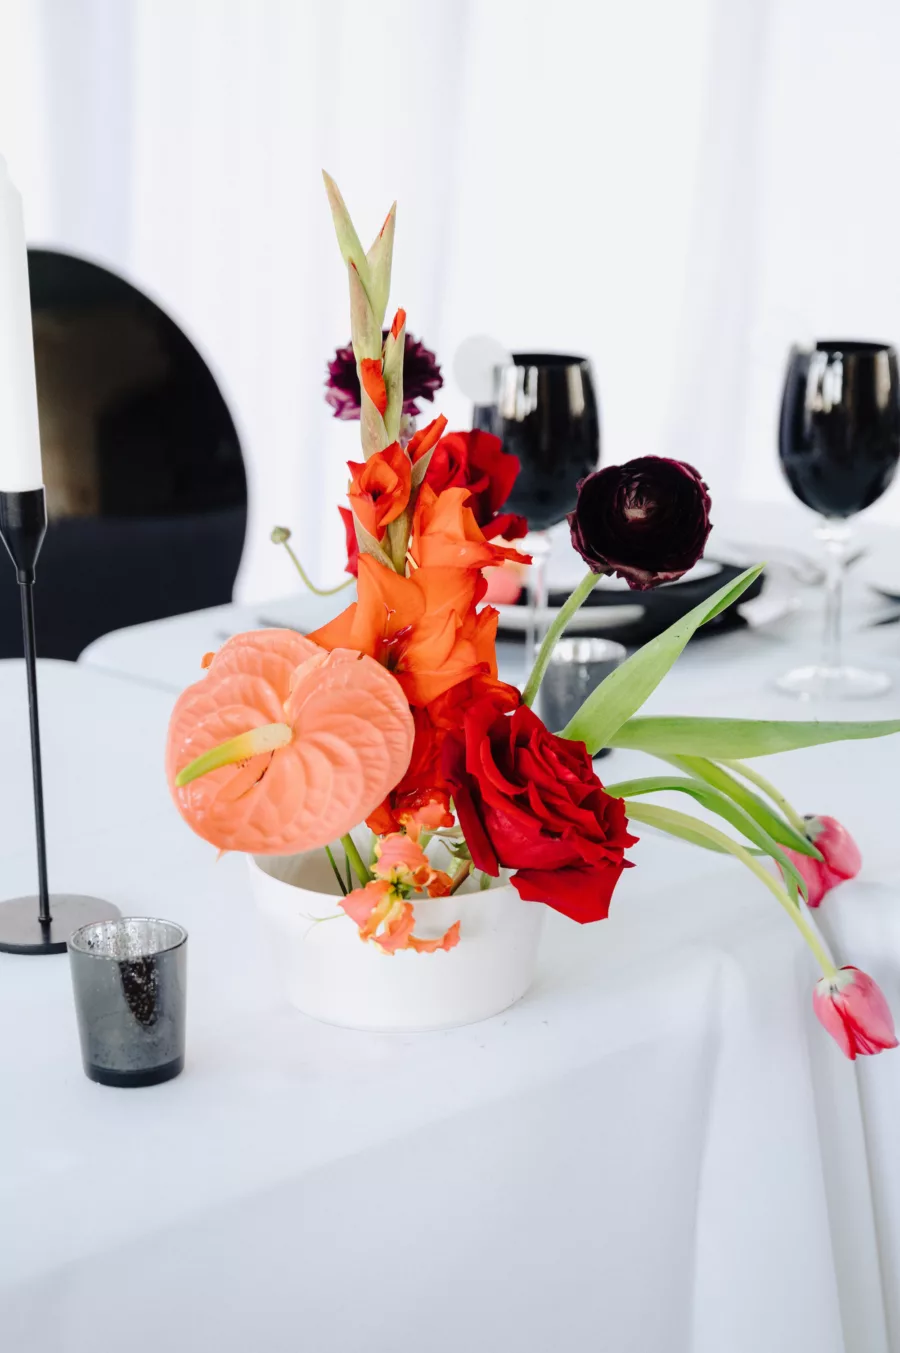 Modern Spring Wedding Reception Decor Inspiration | Tabletop Floral Arrangement with Orange Anthurium, Birds of Paradise, Pink Tulips, and Red Roses | Tampa Bay Florist Save The Date Florida